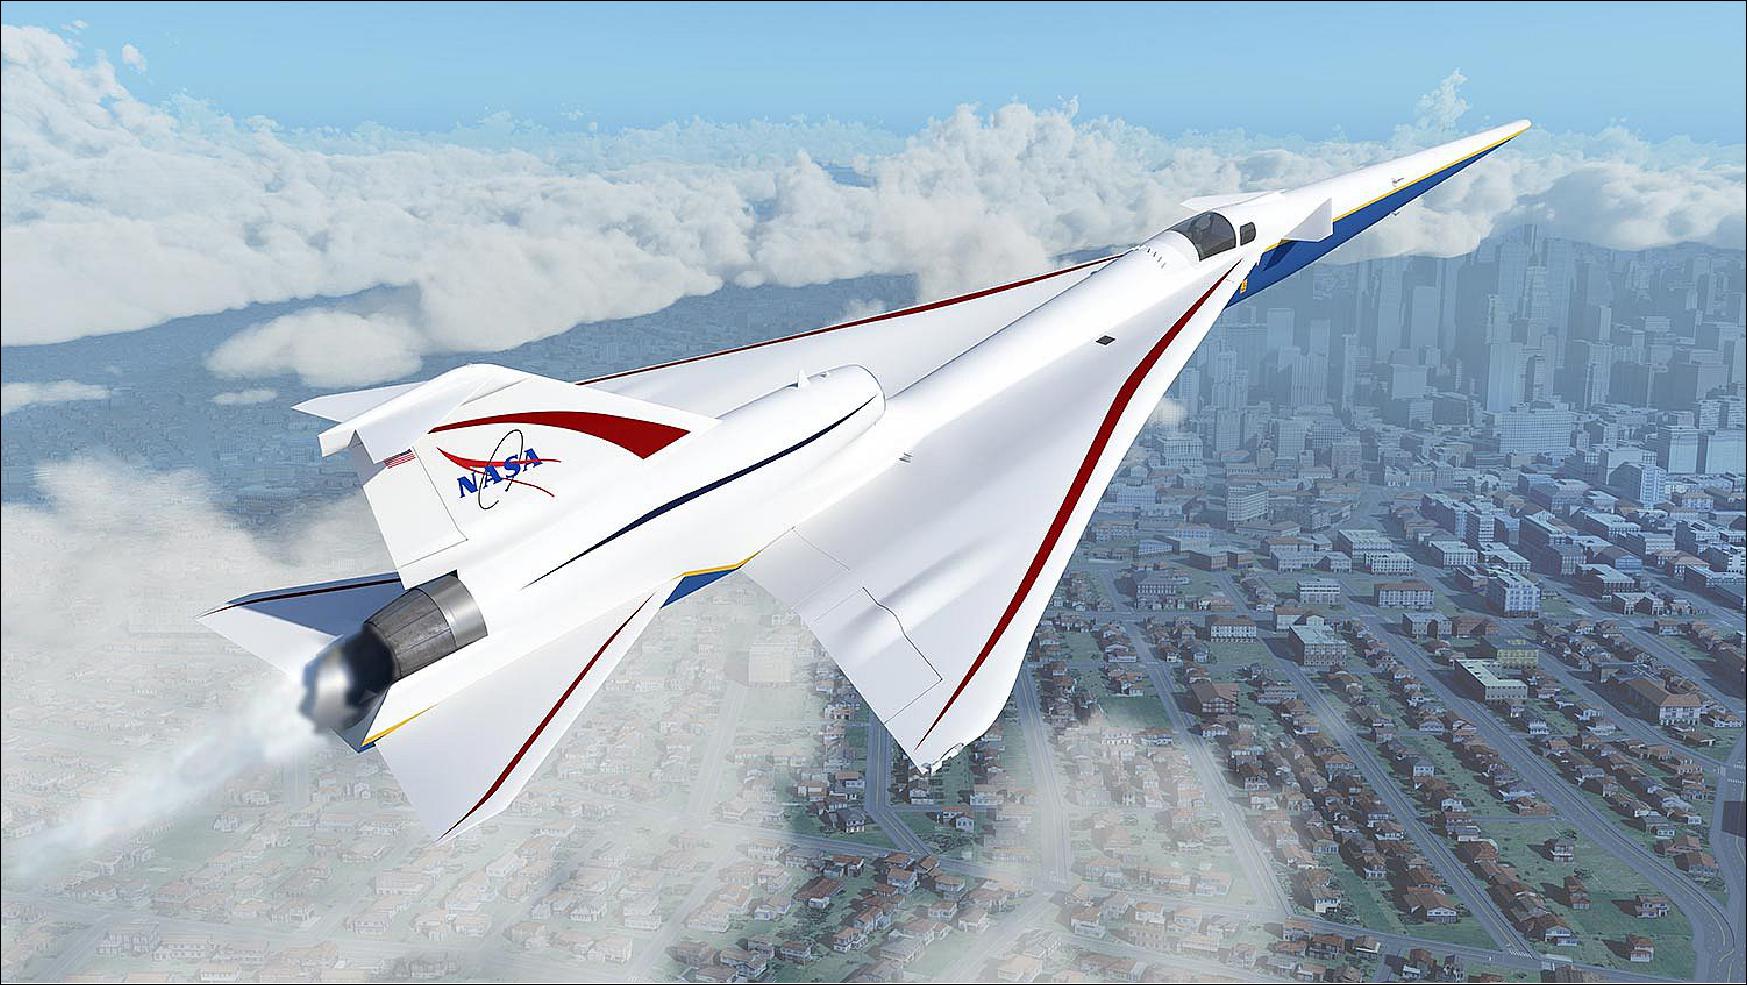 Figure 7: NASA's X-59 QueSST (Quiet SuperSonic Technology) aircraft is designed to fly faster than the speed of sound without producing a loud, disruptive sonic boom, which is typically heard on the ground below aircraft flying at such speeds. Instead, with the X-59, people on the ground will hear nothing more than a quiet sonic thump – if they hear anything at all. The X-59 will fly over communities around the United States to demonstrate this technology, but first, NASA will need to validate the X-plane's acoustic signature, using a ground recording system (image credit: NASA / Joey Ponthieux)